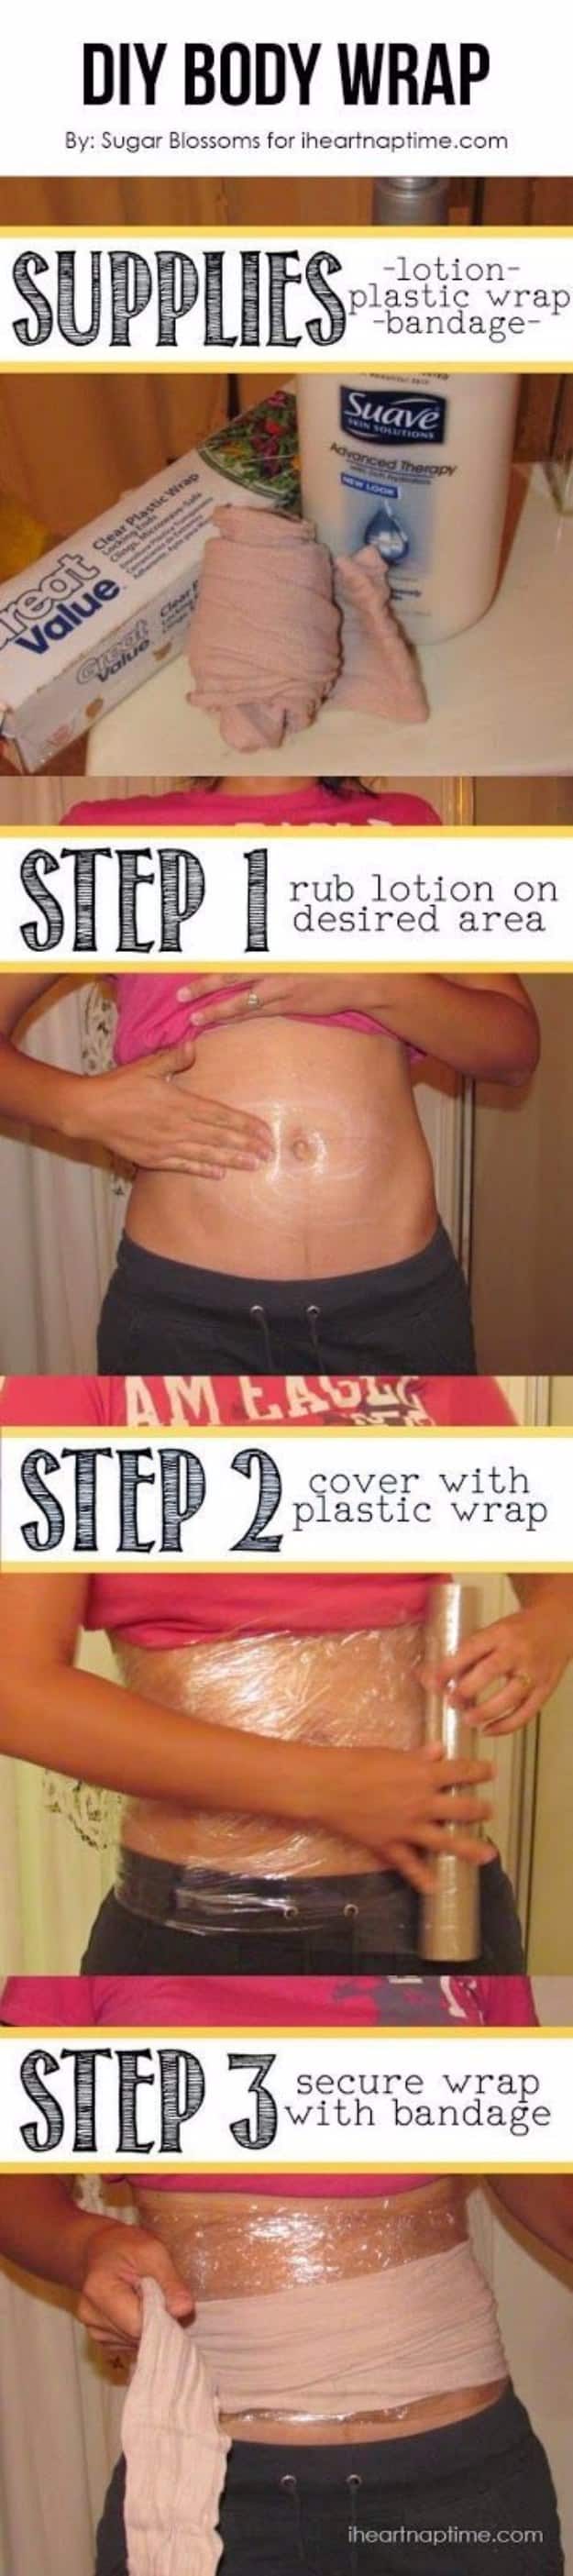 DIY Detox Recipes, Ideas and Tips - DIY Body Wrap - How to Detox Your Body, Brain and Skin for Health and Weight Loss. Detox Drinks, Waters, Teas, Wraps, Soup, Masks and Skincare Products You Can Make At Home 